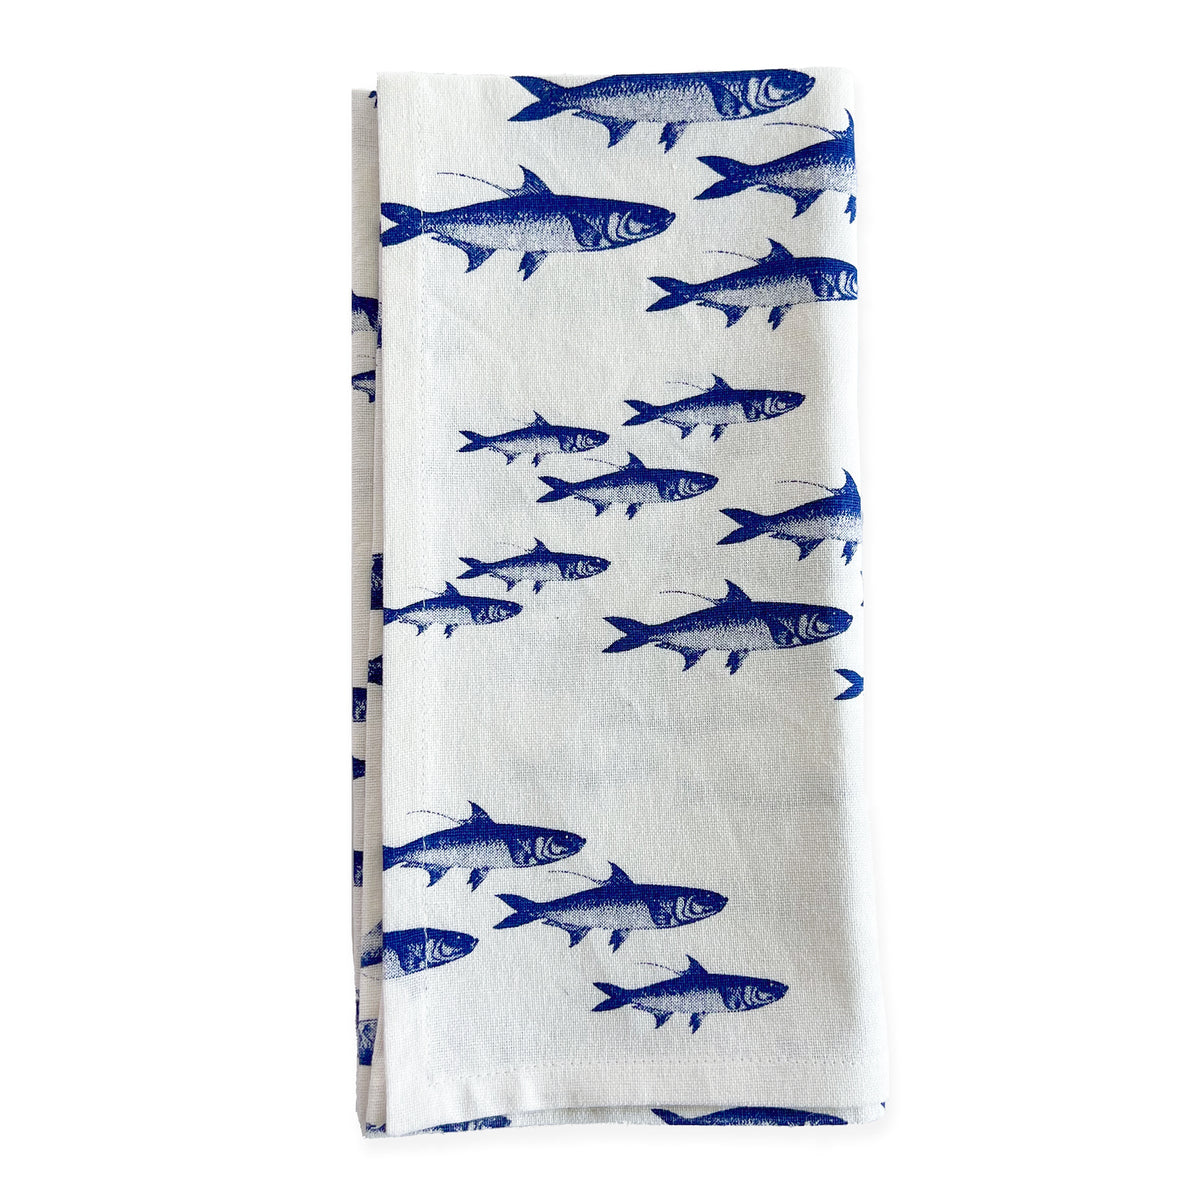 A set of School of Fish Dinner Napkins from Caskata, made of 100% cotton and featuring a pattern of blue fish printed in rows against a white background, isolated on a white surface.